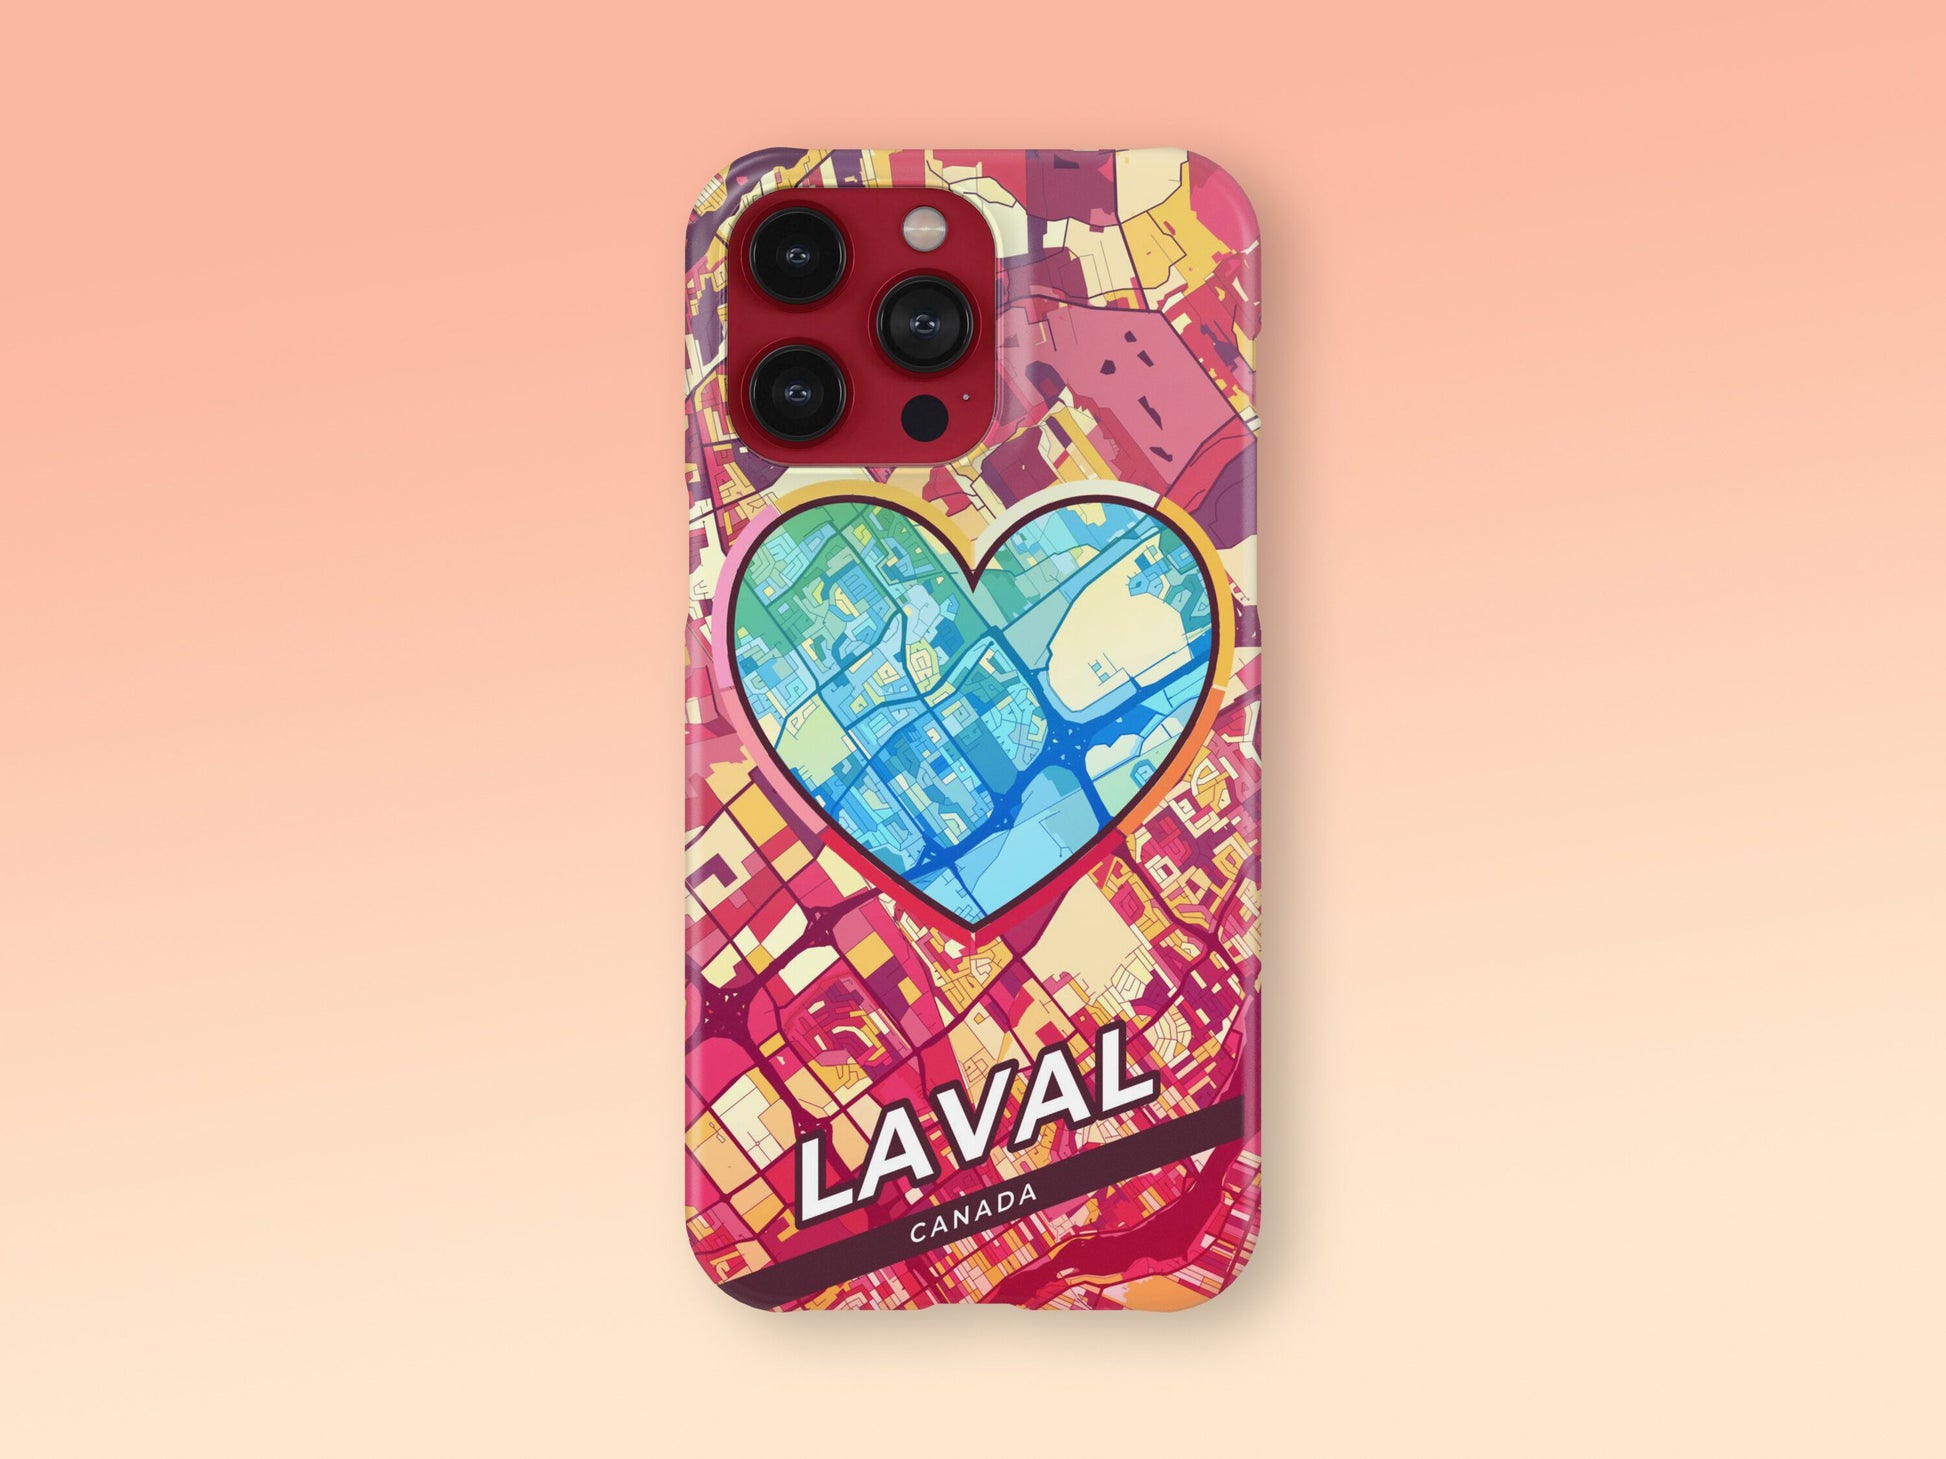 Laval Canada slim phone case with colorful icon. Birthday, wedding or housewarming gift. Couple match cases. 2